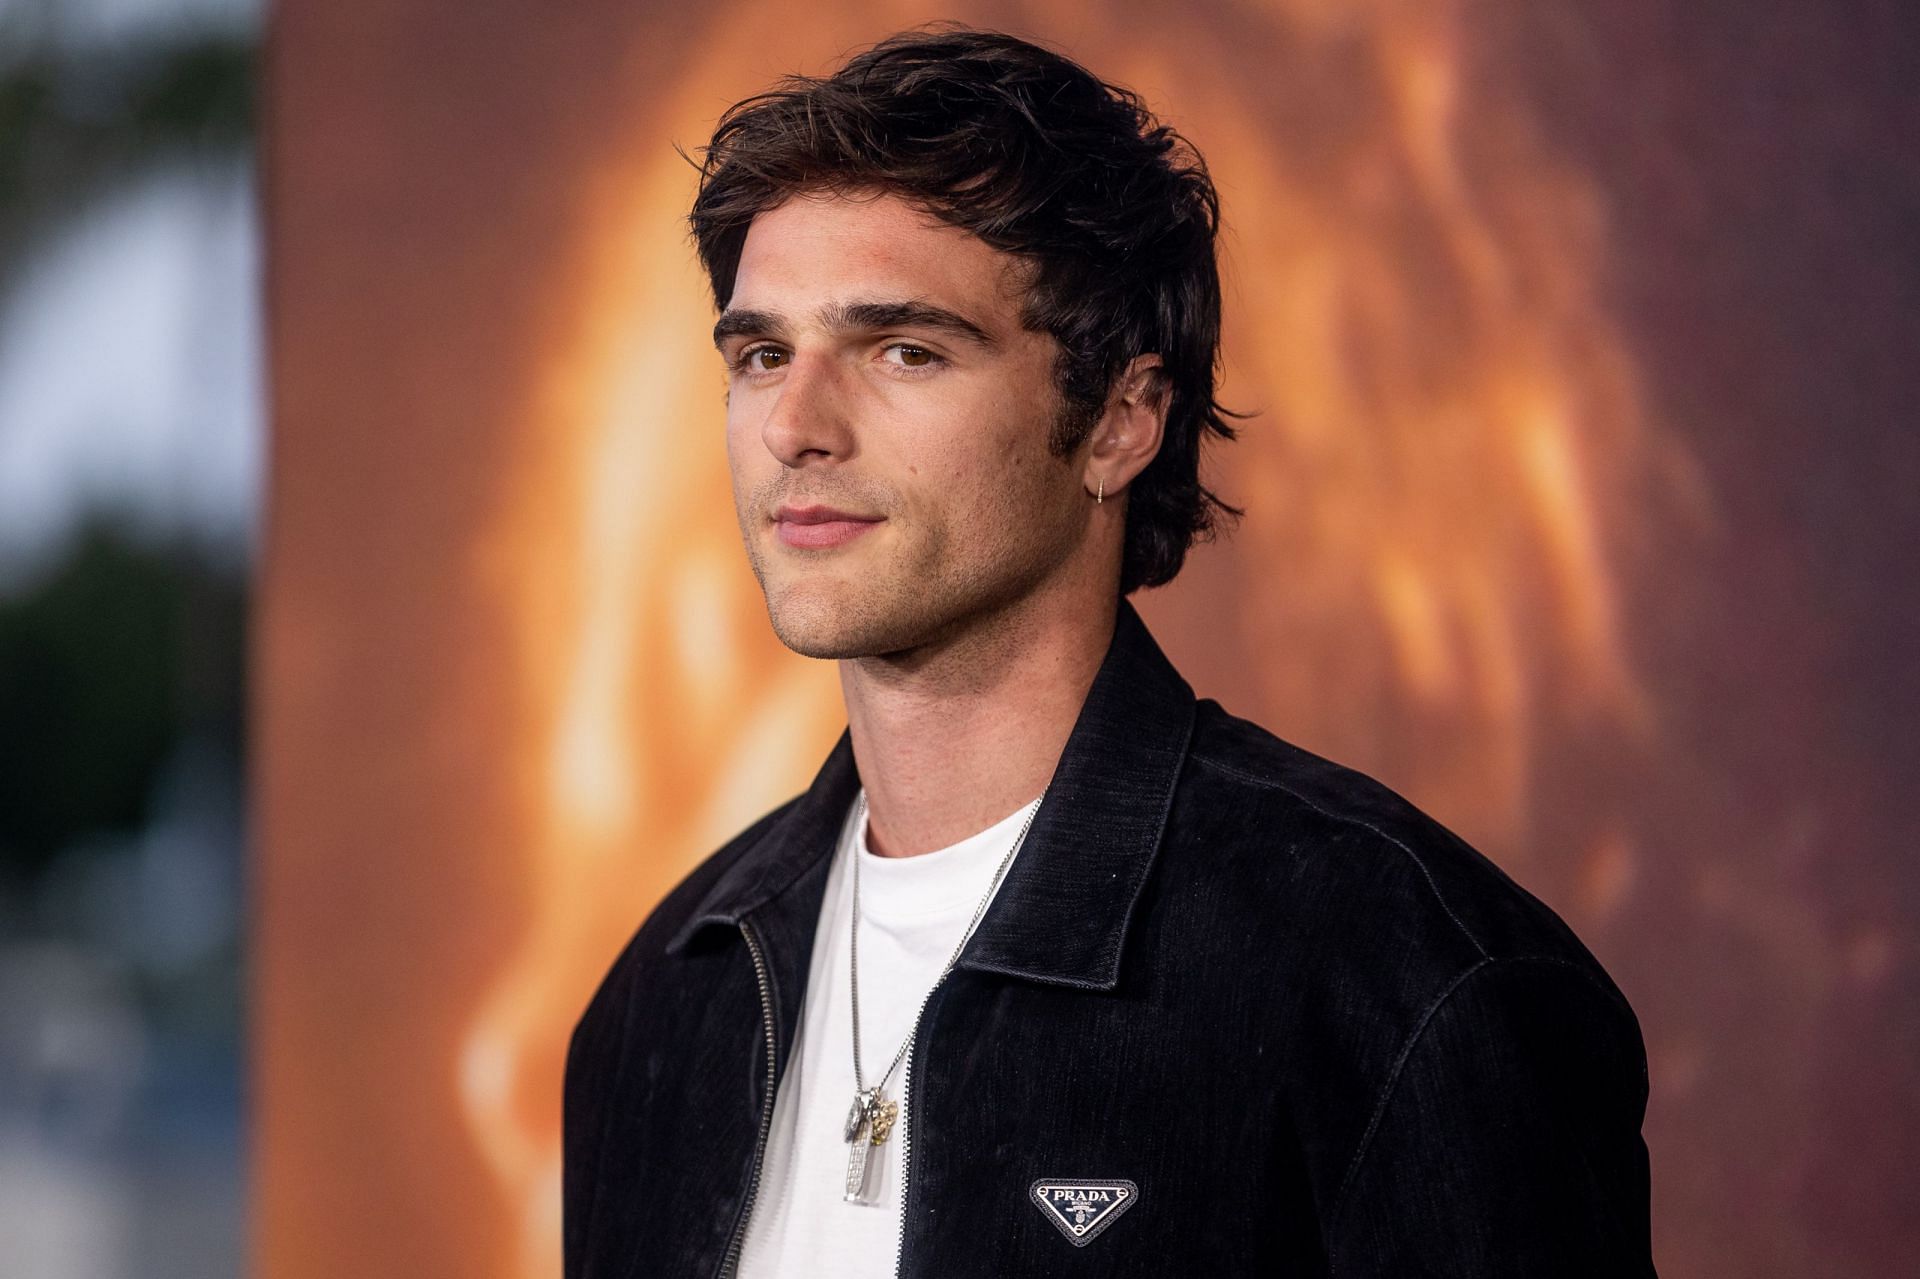 Rising star Jacob Elordi is a fitting choice for the next Clark Kent (Image via Getty)